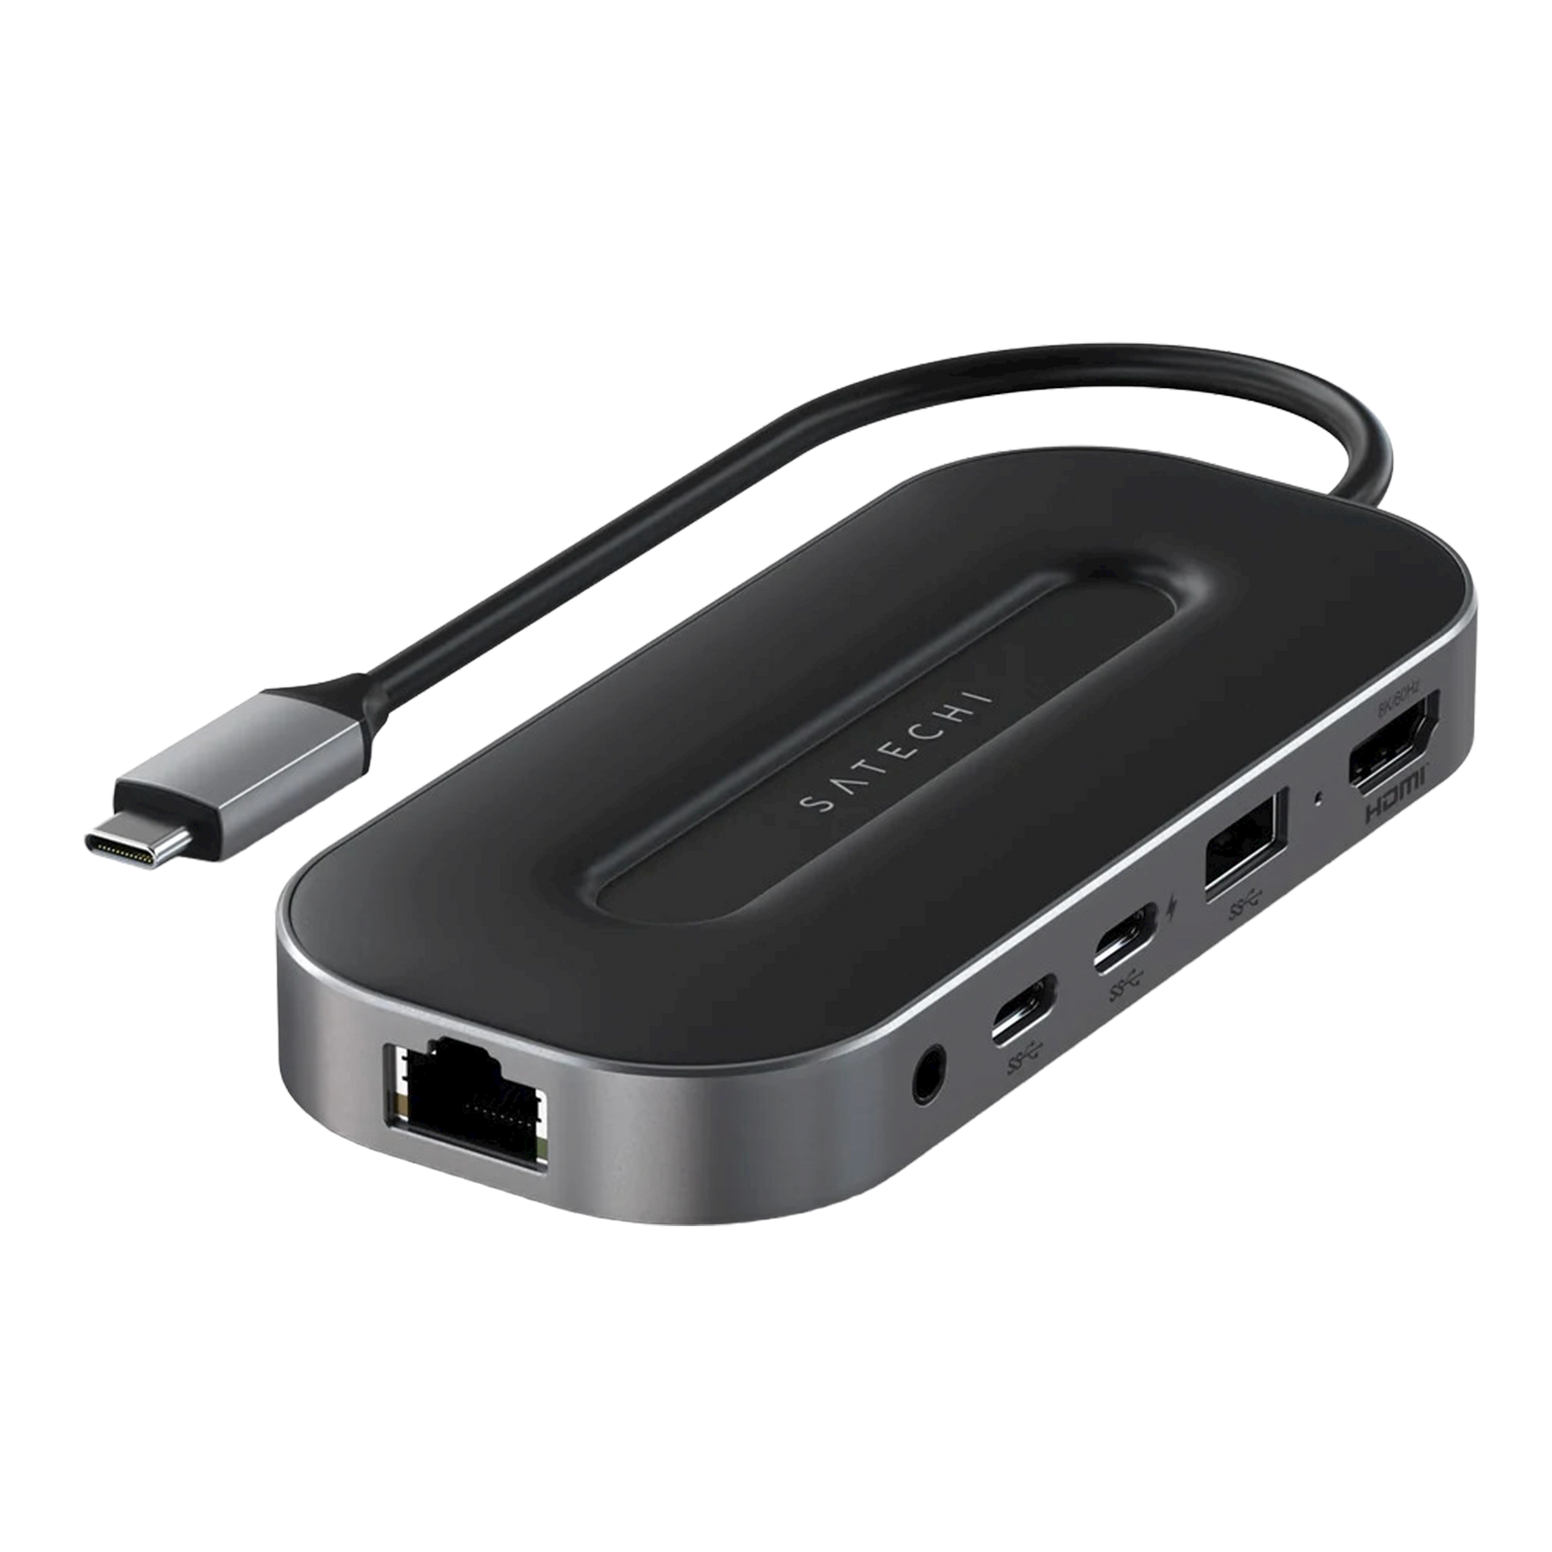 Satechi USB-4 Multiport Adapter with 2.5G Ethernet